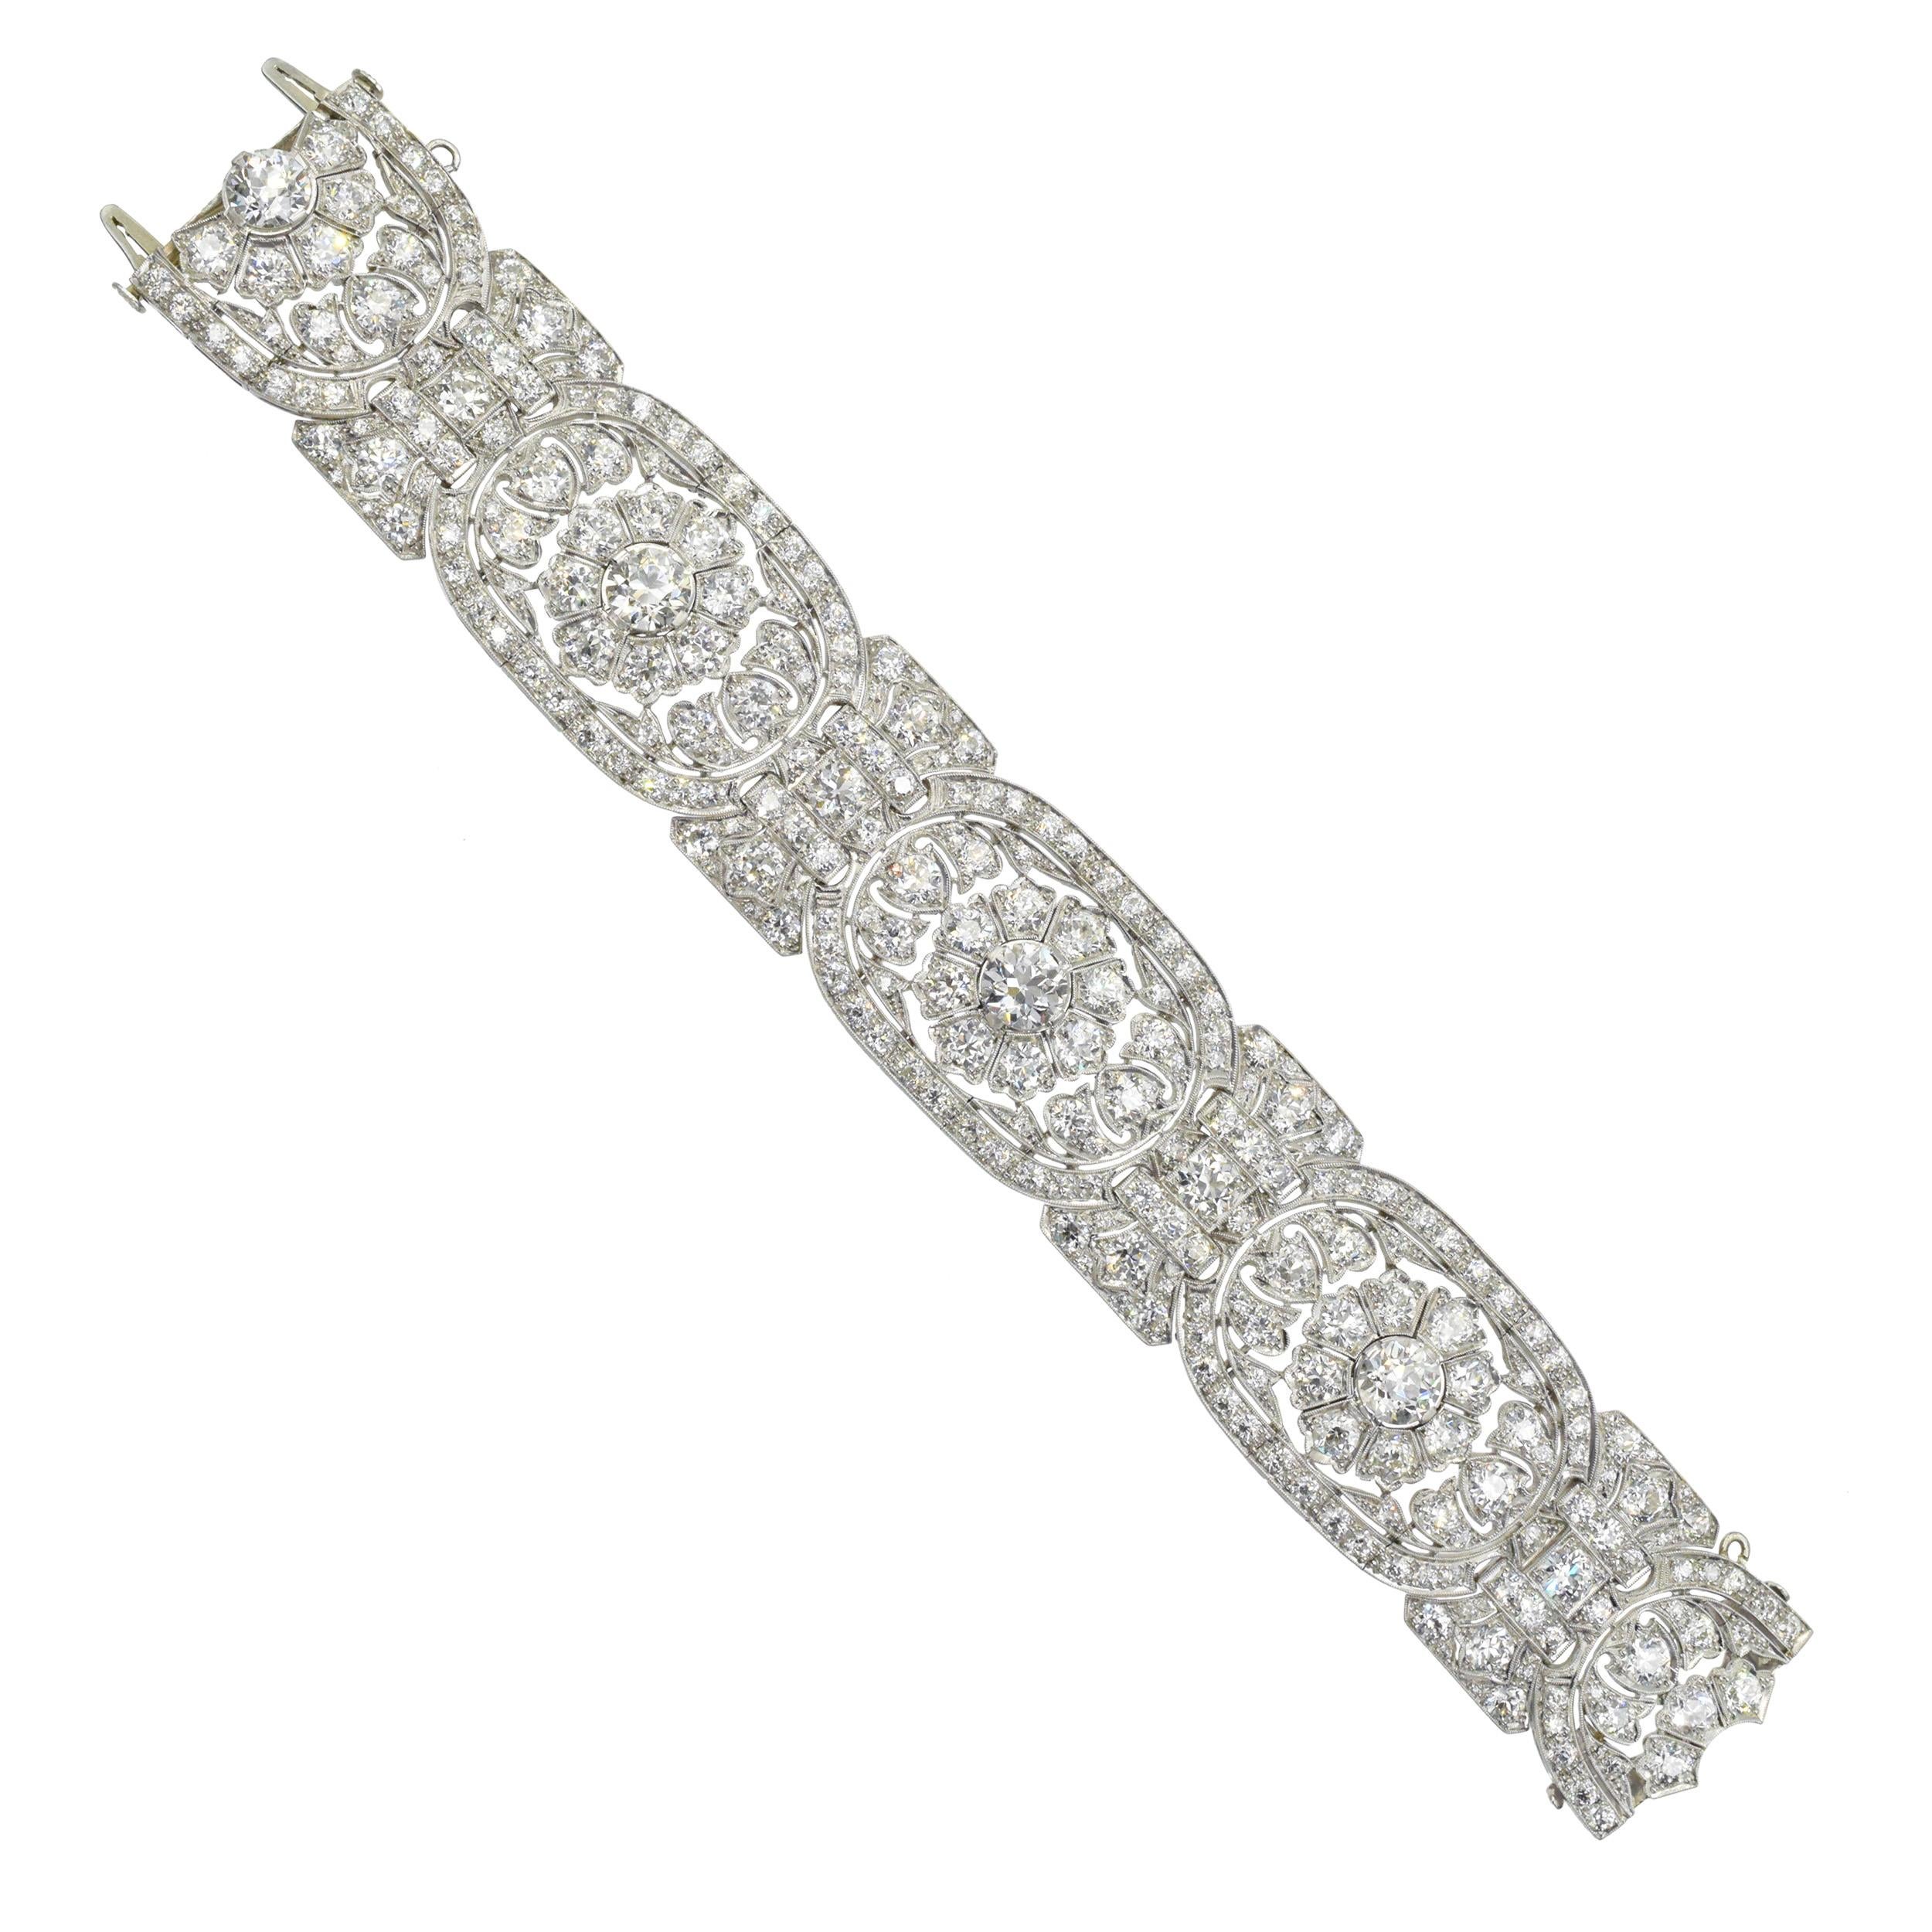 Art Deco Diamond  and Platinum Bracelet
This antique Art Deco bracelet has old european cut round diamonds weighing a total of approximately 40-45 carats of diamonds (inclusive of 4 old european cut round approx. 1 ct diamonds with GIA certificates)